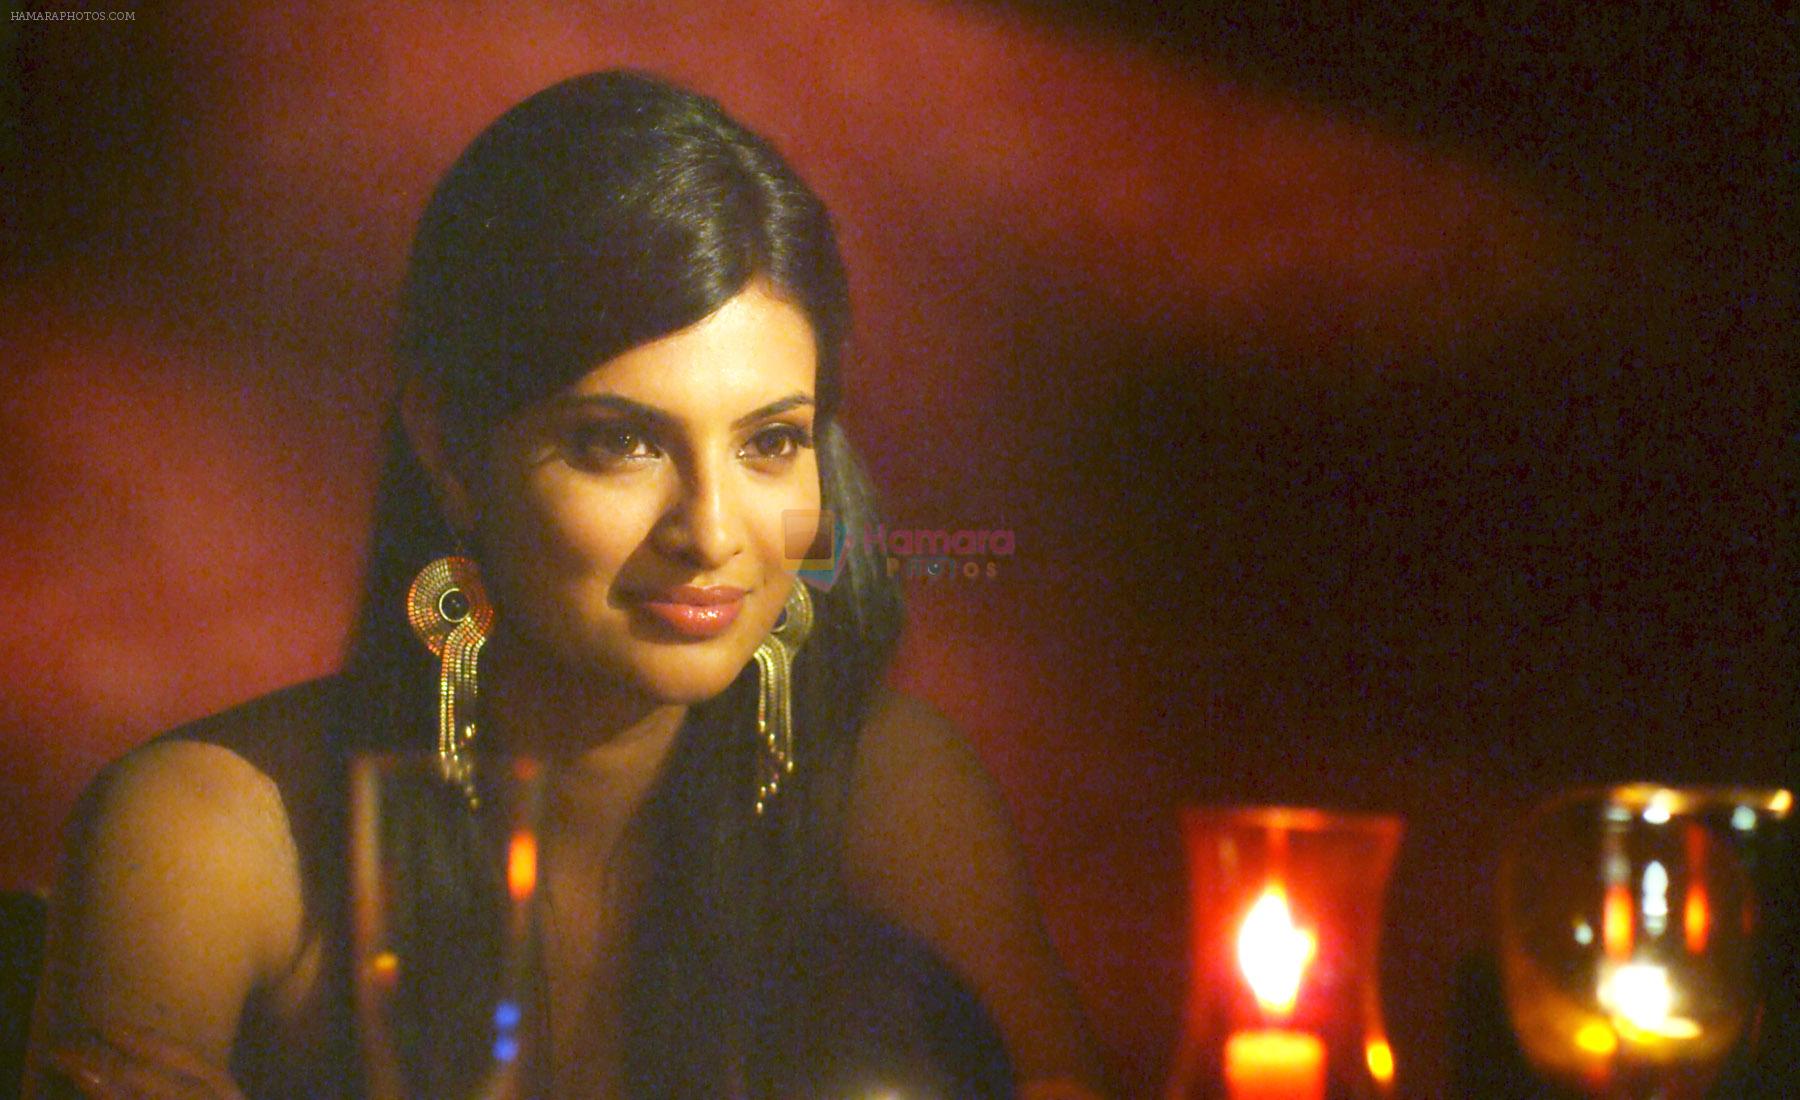 Sayali Bhagat in the still from movie Ghost